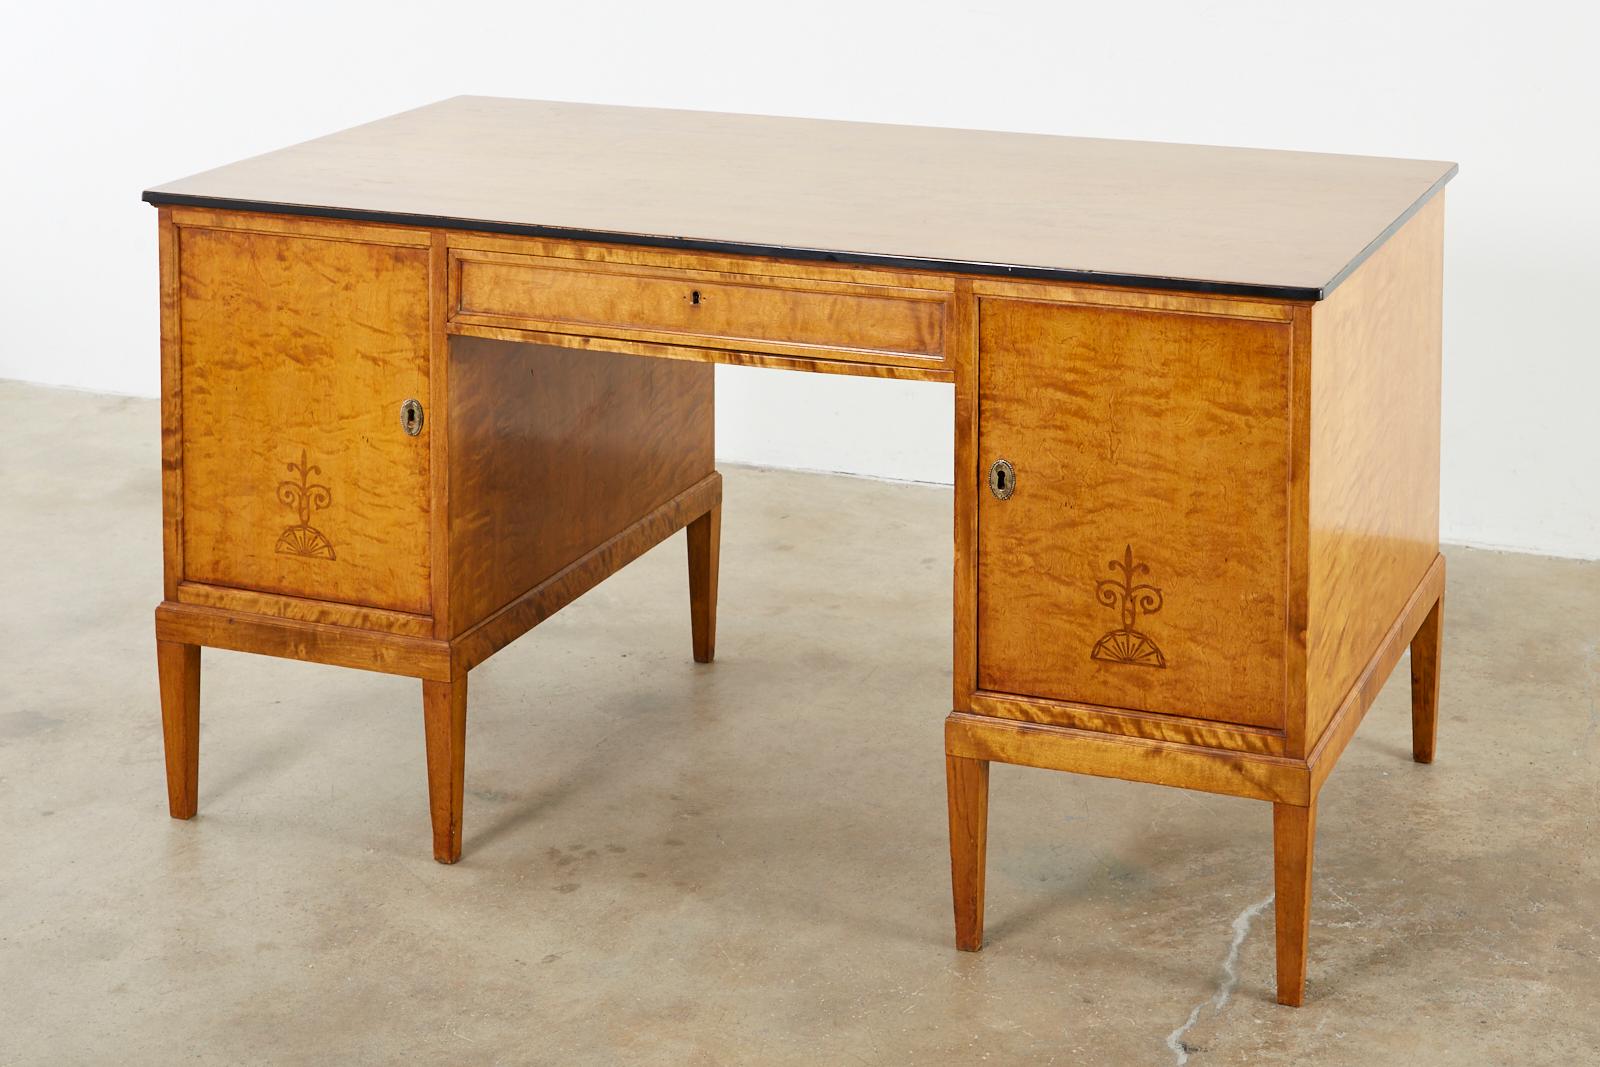 Exquisite Swedish modern writing table or desk produced in the late Art Deco period by SMF Svenska Mobelfabriken Bodafors. Crafted from fantastic, radiant grained flame birch beautifully finished on all sides. Pedestal style desk fronted by two